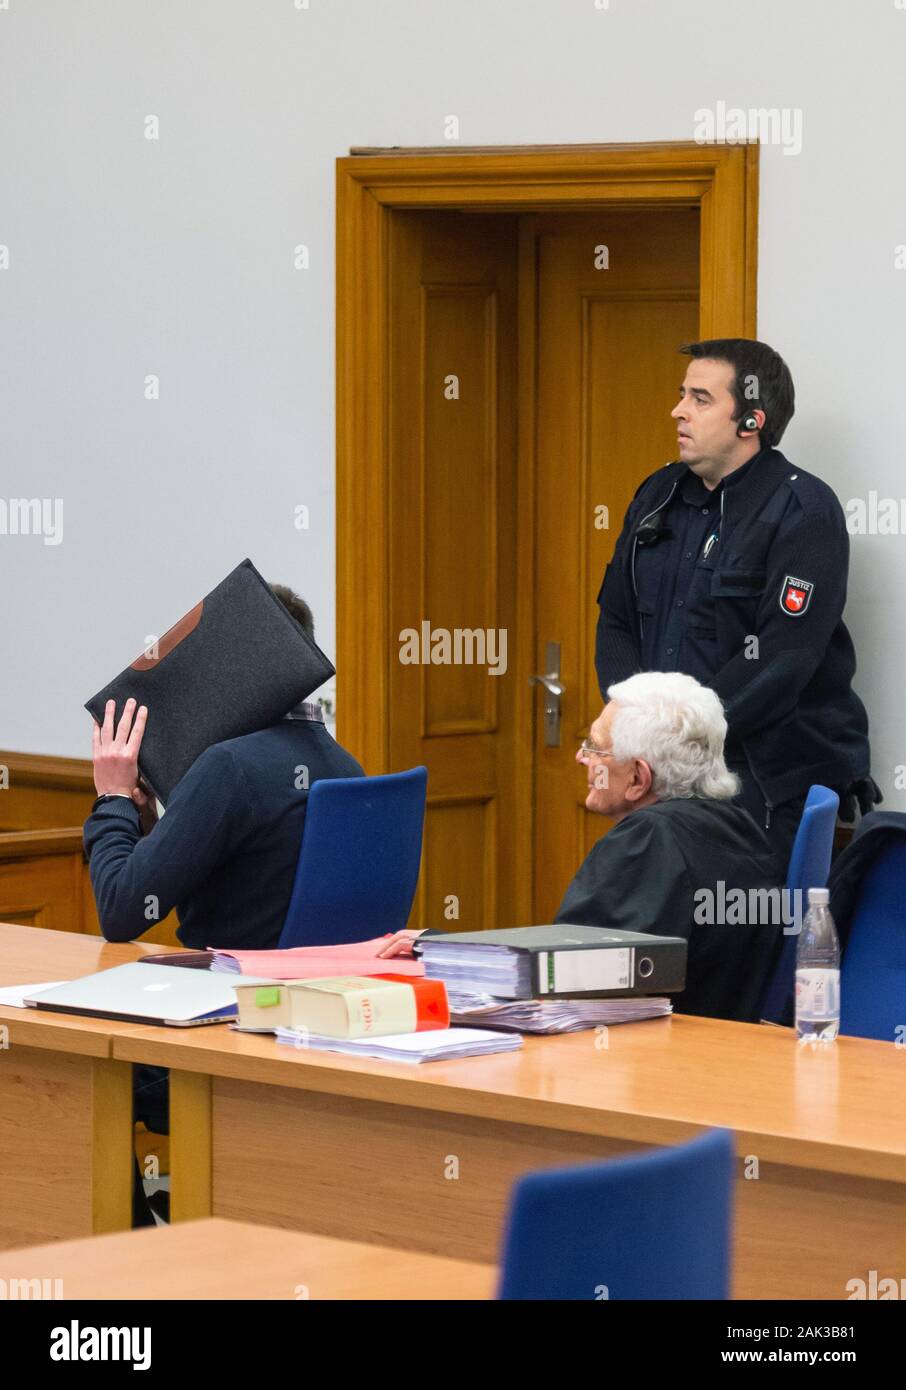 07 January 2020, Lower Saxony, Lüneburg: The defendant (l) sits next to Herbert Lederer (r), his lawyer, in the Lüneburg Regional Court before the start of the trial. The 26-year-old is alleged to have sexually abused several children in Lueneburg and other places as trainer and supervisor of a DLRG local group. Photo: Philipp Schulze/dpa Stock Photo